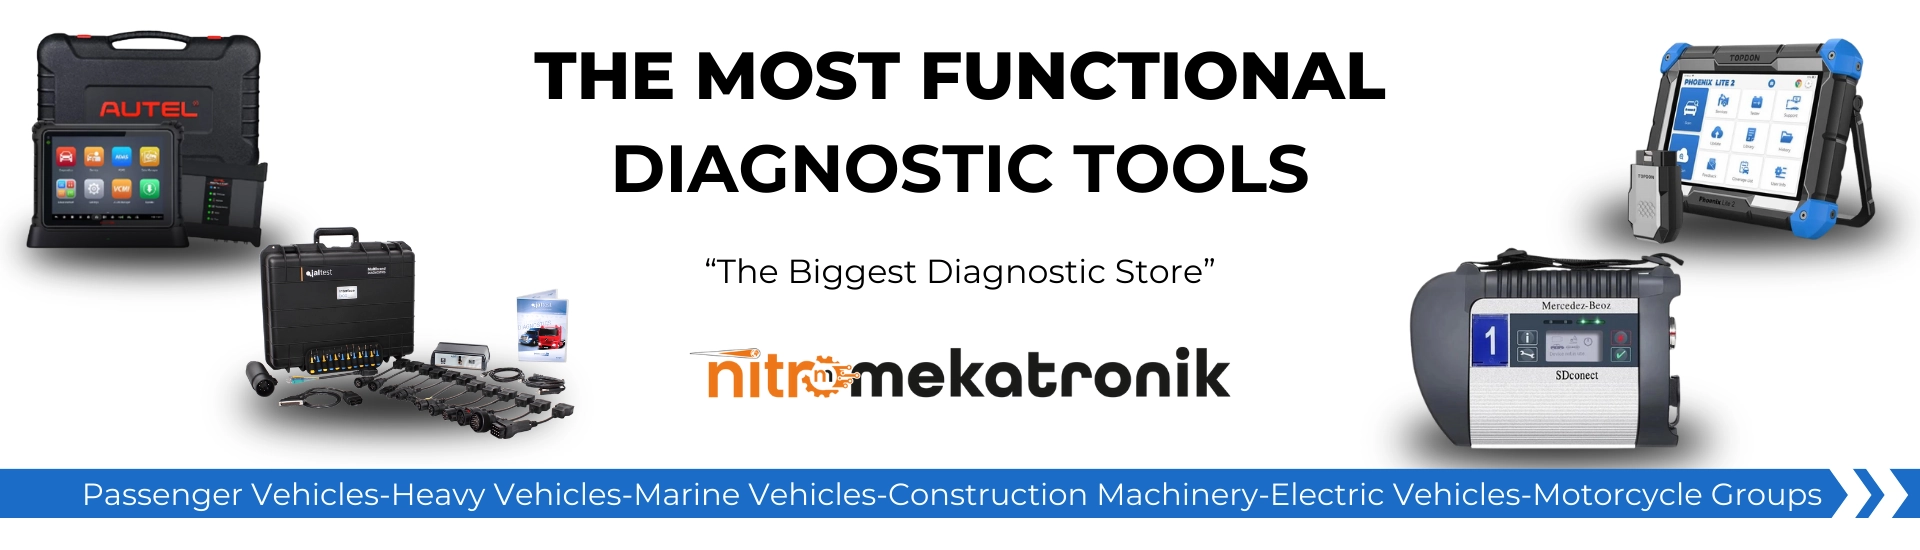 the-most-functional-diagnostic-tools